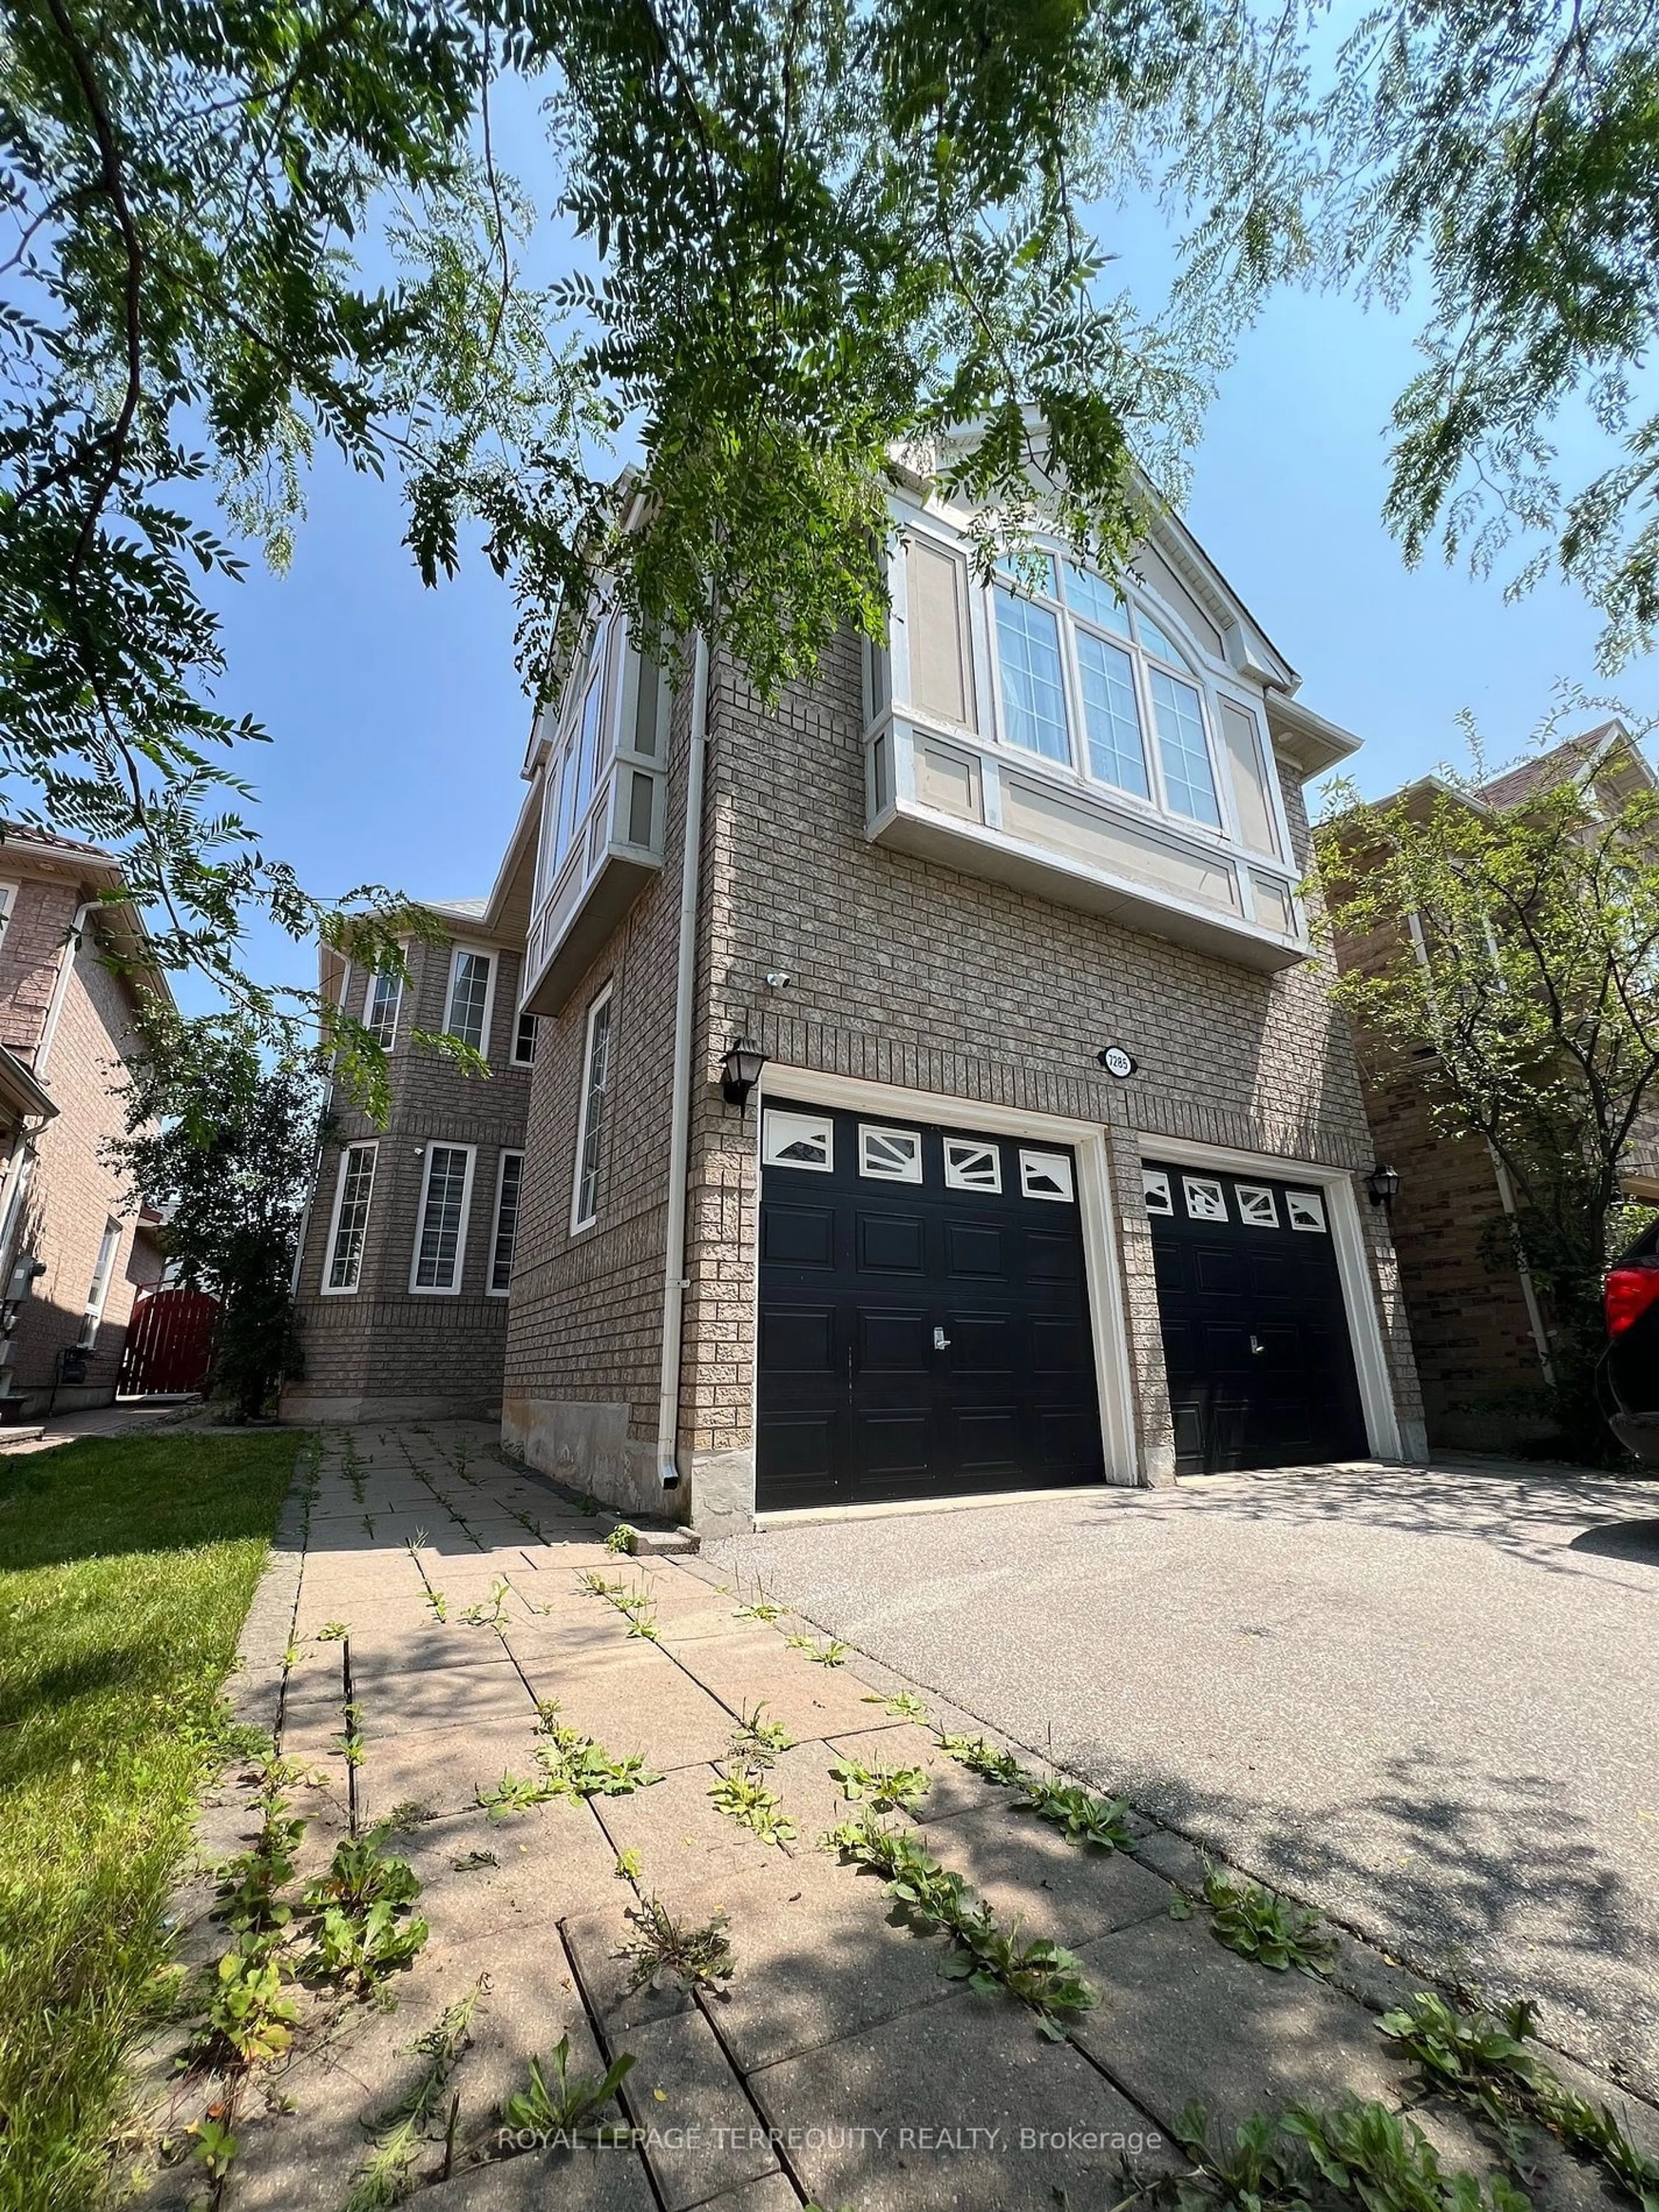 Home with brick exterior material for 7285 Rosehurst Dr, Mississauga Ontario L5N 8H1